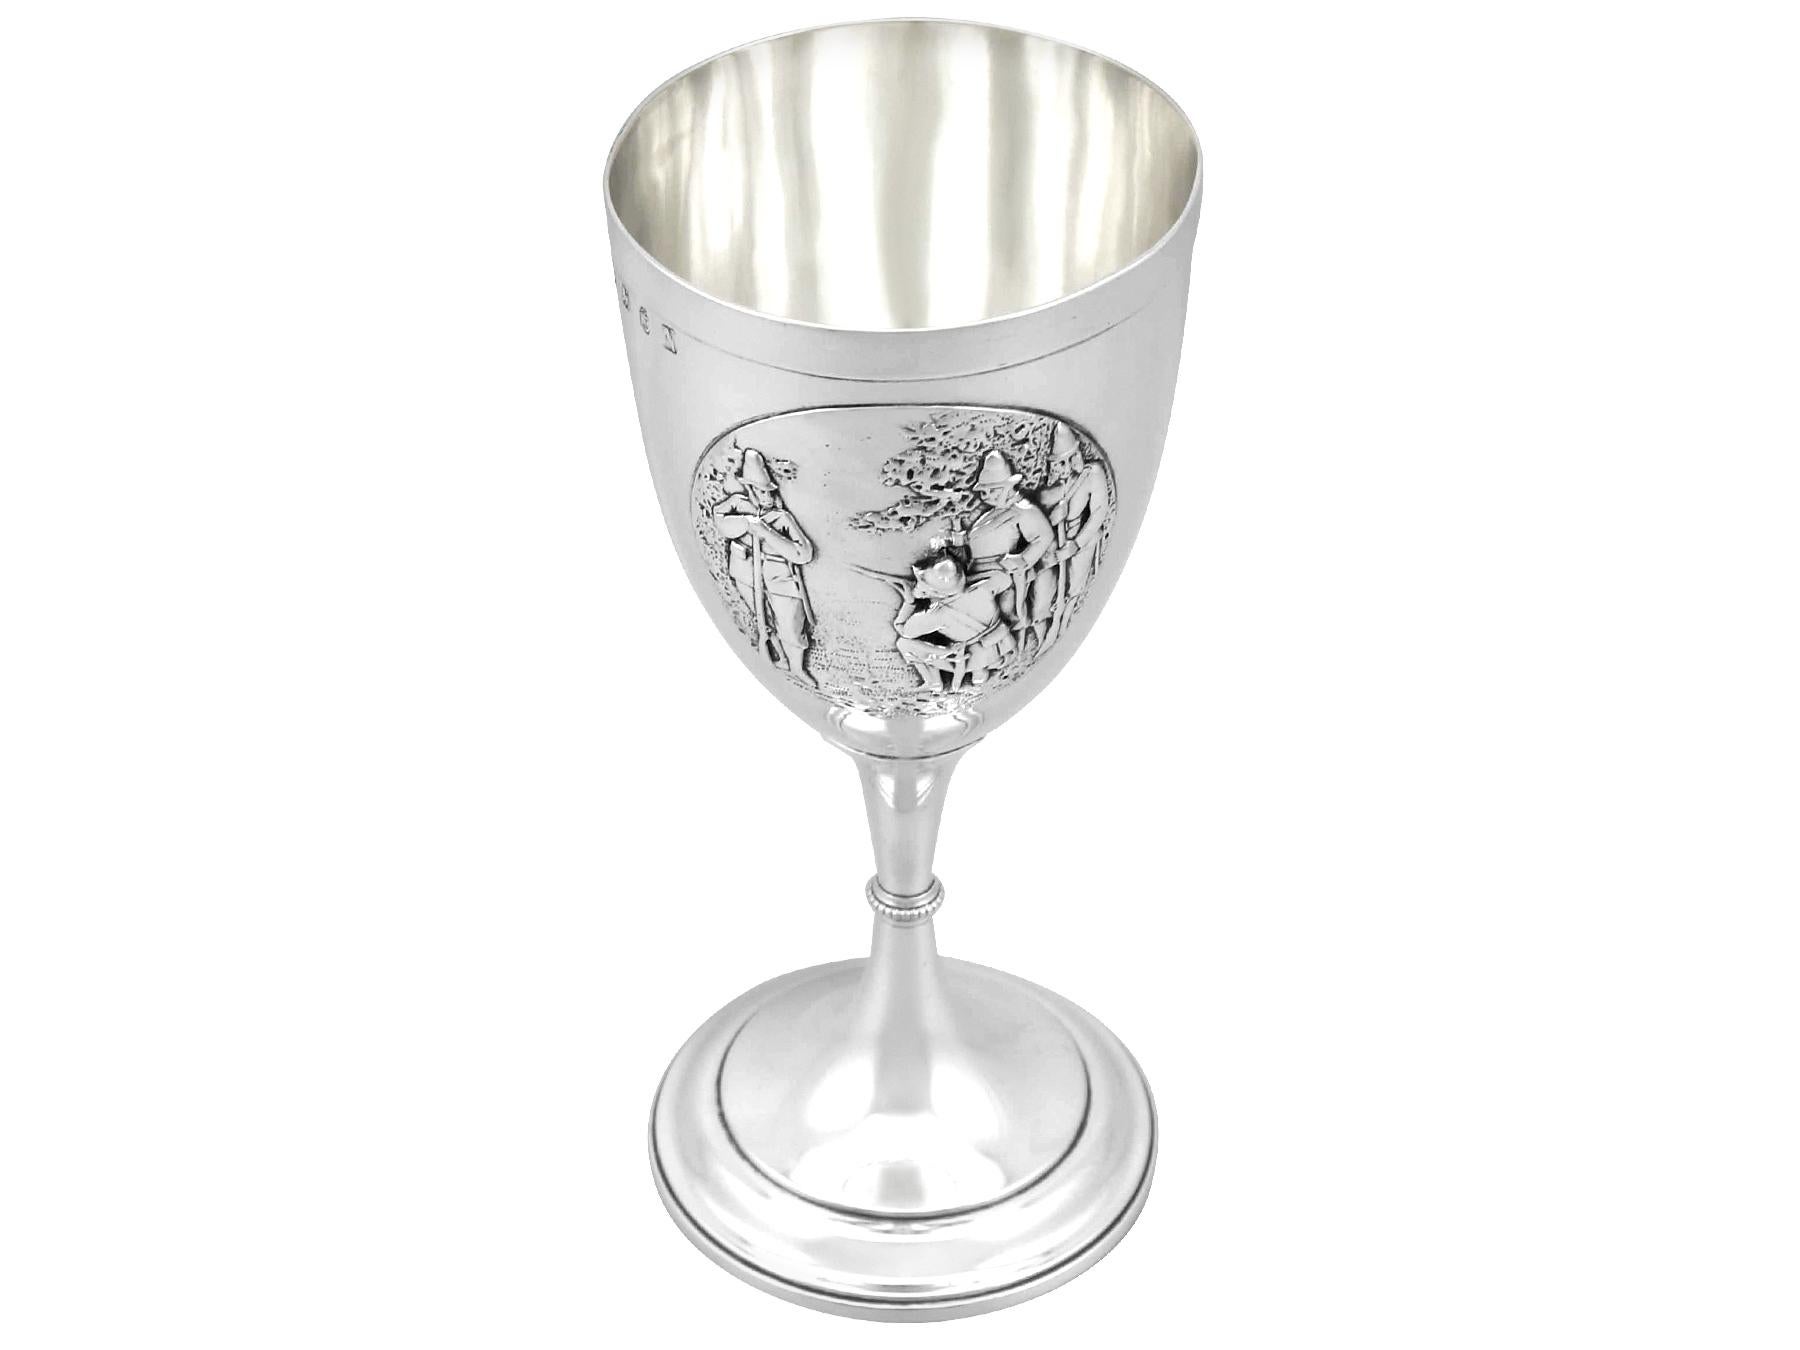 Elkington & Co Ltd Antique Victorian Sterling Silver Goblet In Excellent Condition For Sale In Jesmond, Newcastle Upon Tyne